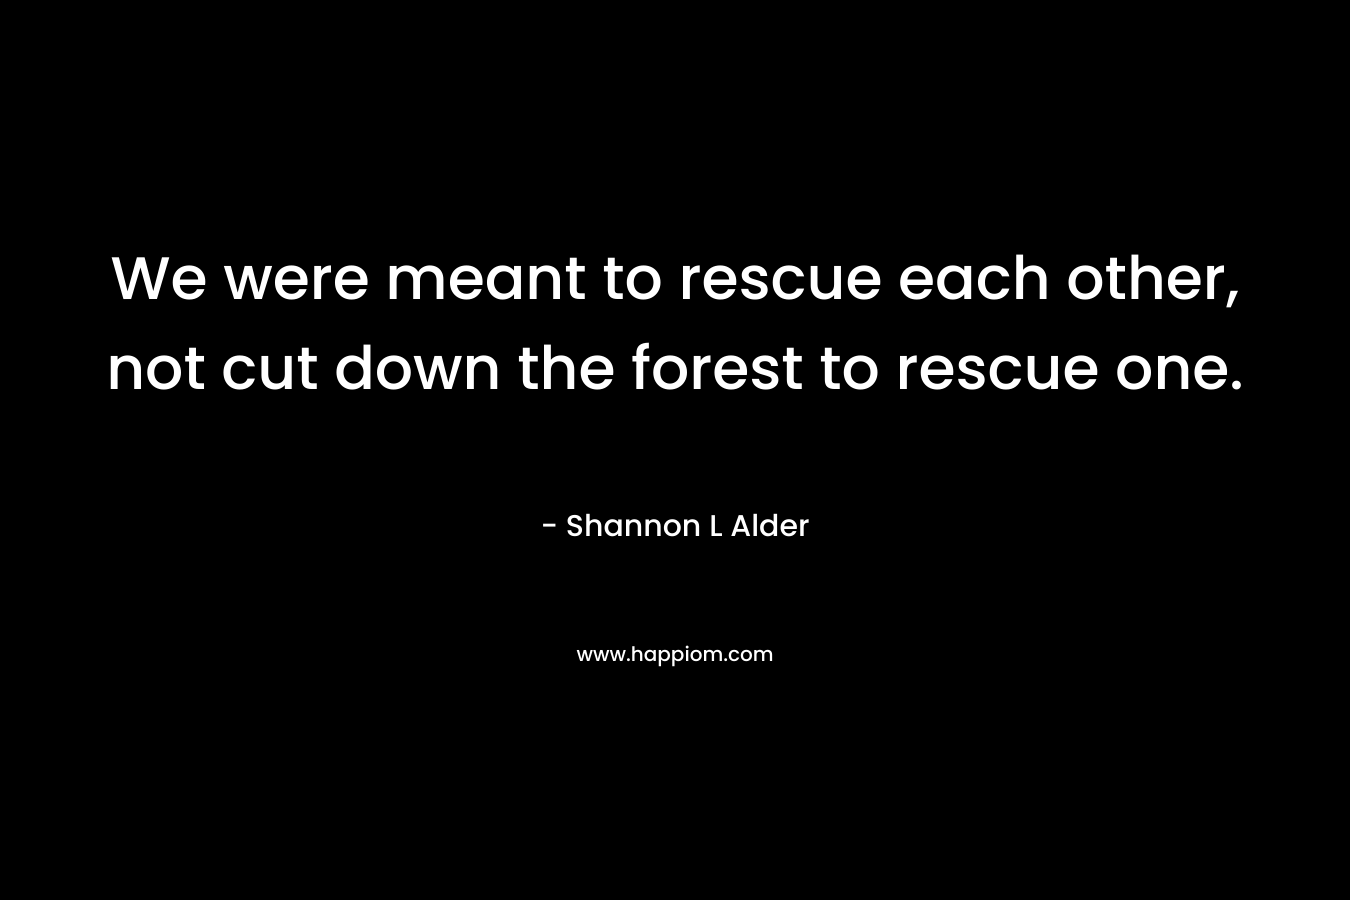 We were meant to rescue each other, not cut down the forest to rescue one.